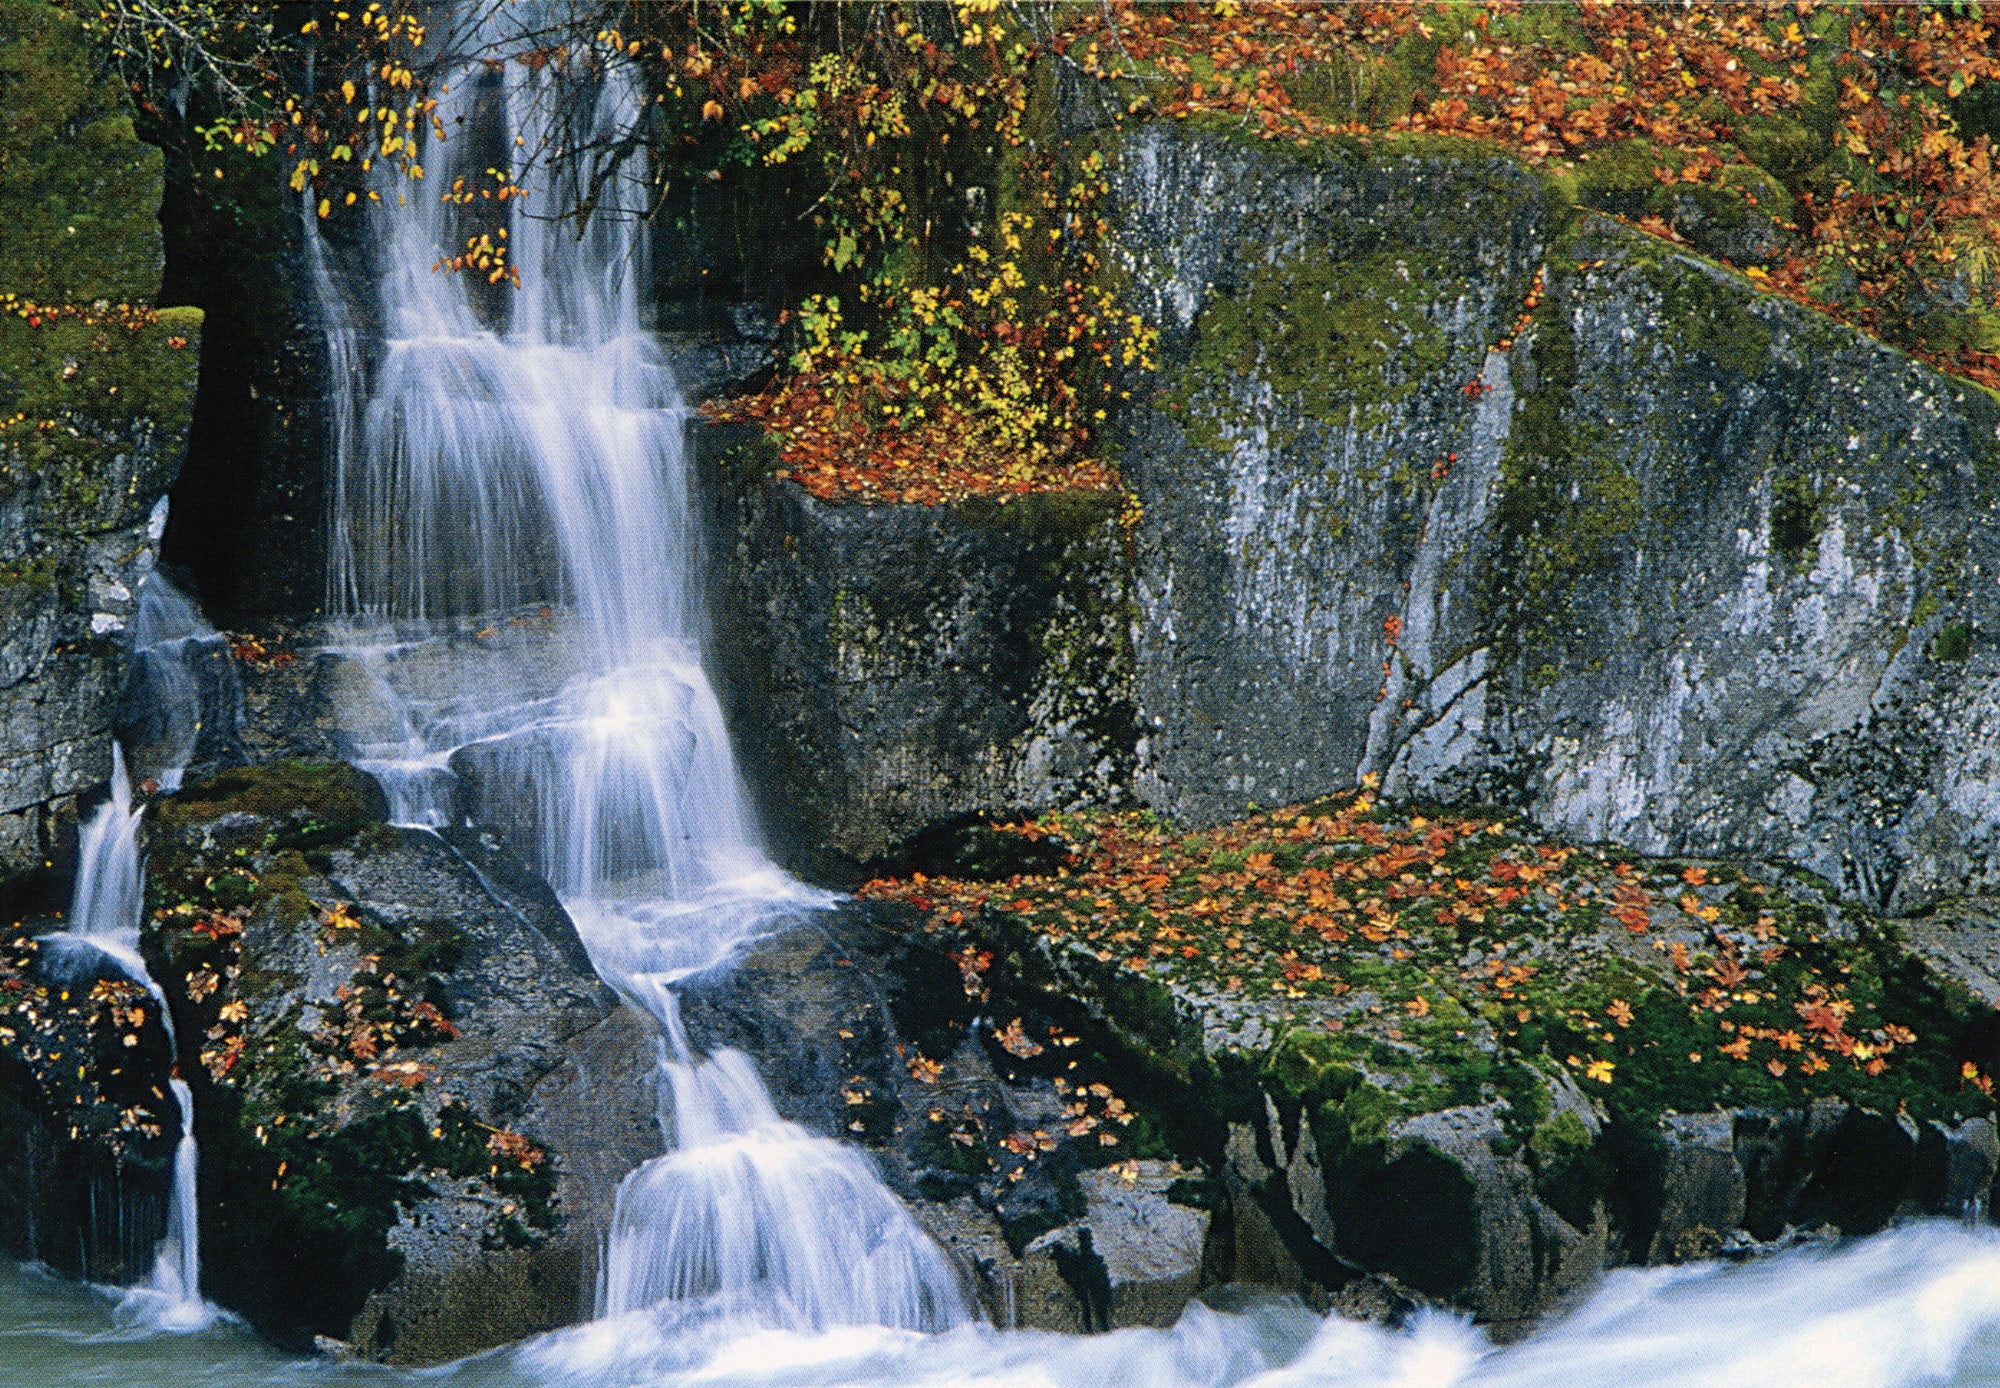 A waterfall surrounded by mossy rocks and fall leaves. End of image description.